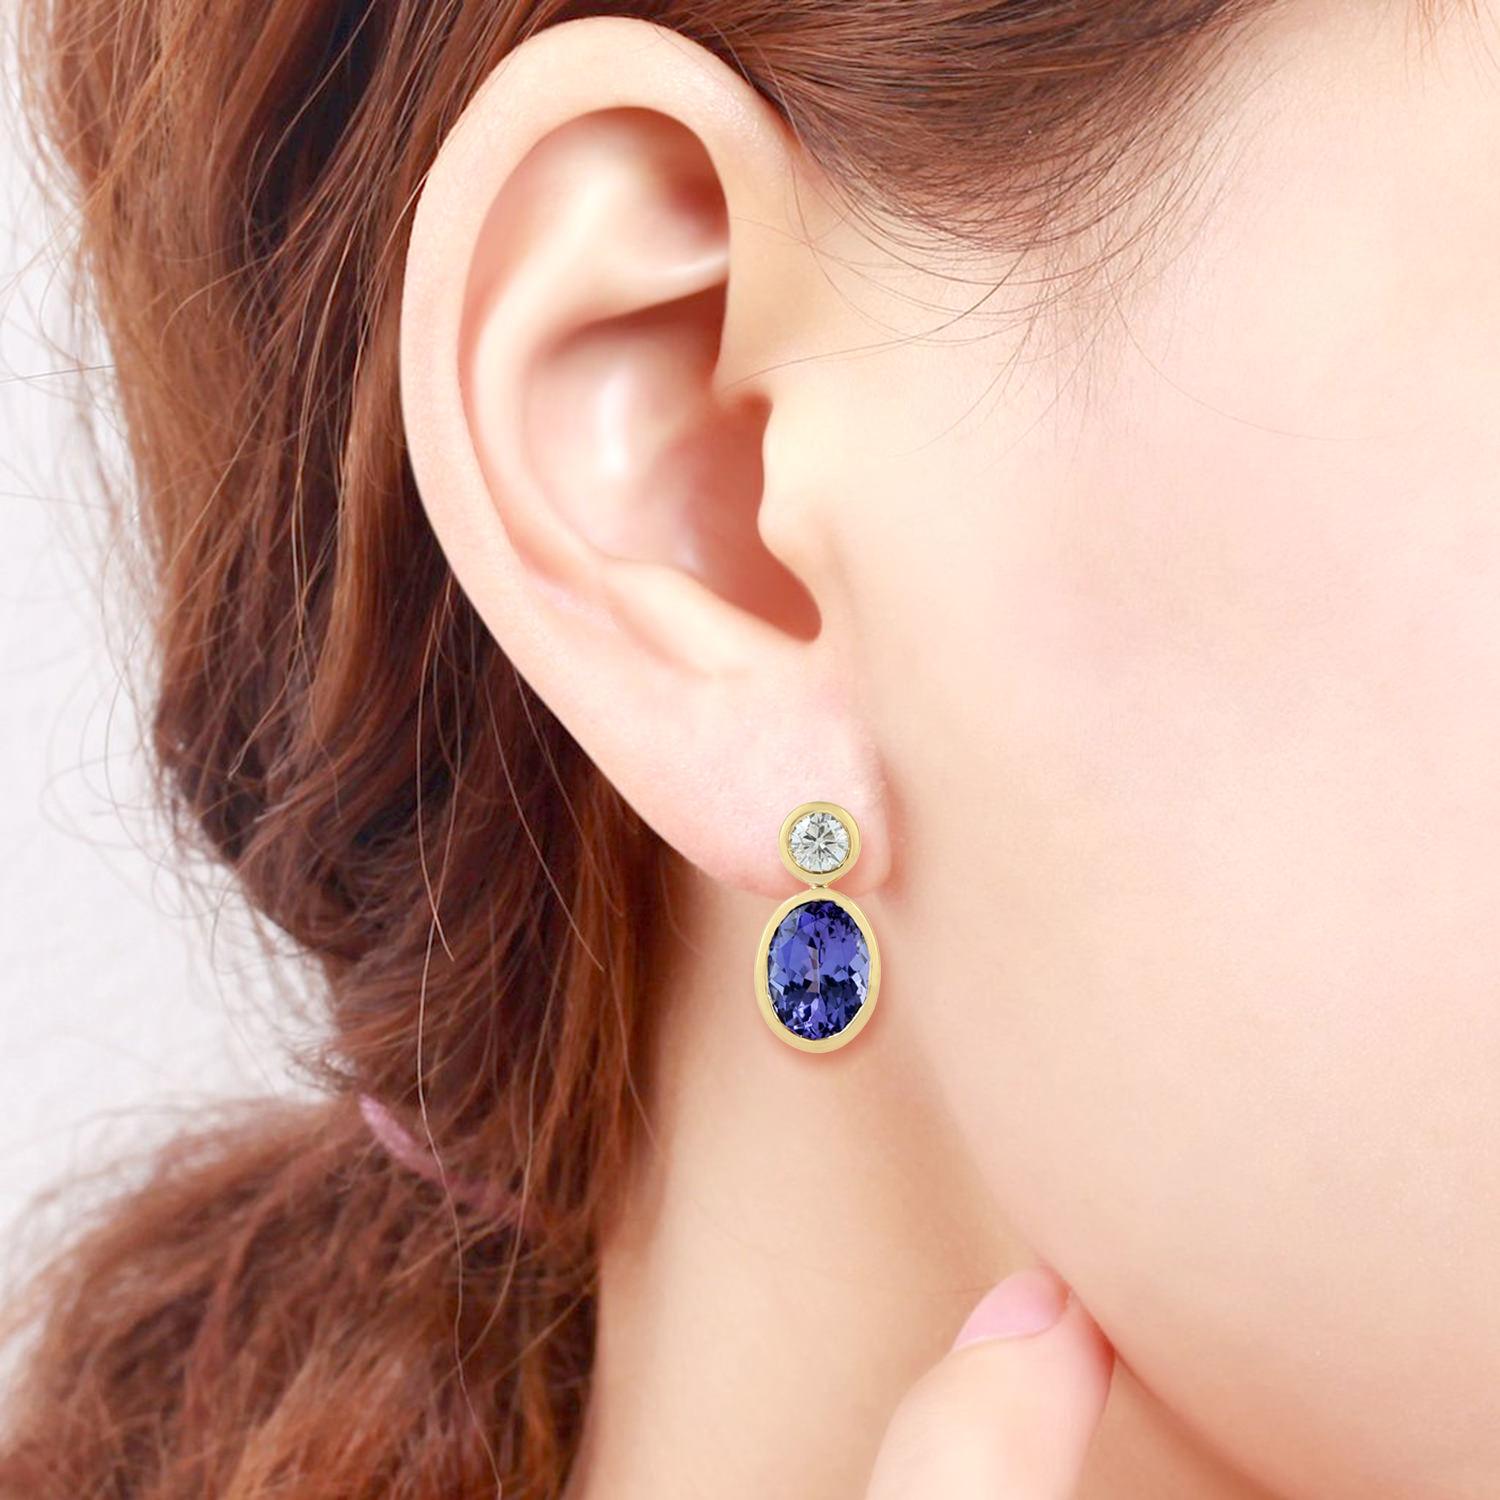 These beautiful earring are handcrafted in 18-karat gold. It is set with 3.22 carats tanzanite and .33 carats of sparkling diamonds.

FOLLOW  MEGHNA JEWELS storefront to view the latest collection & exclusive pieces.  Meghna Jewels is proudly rated